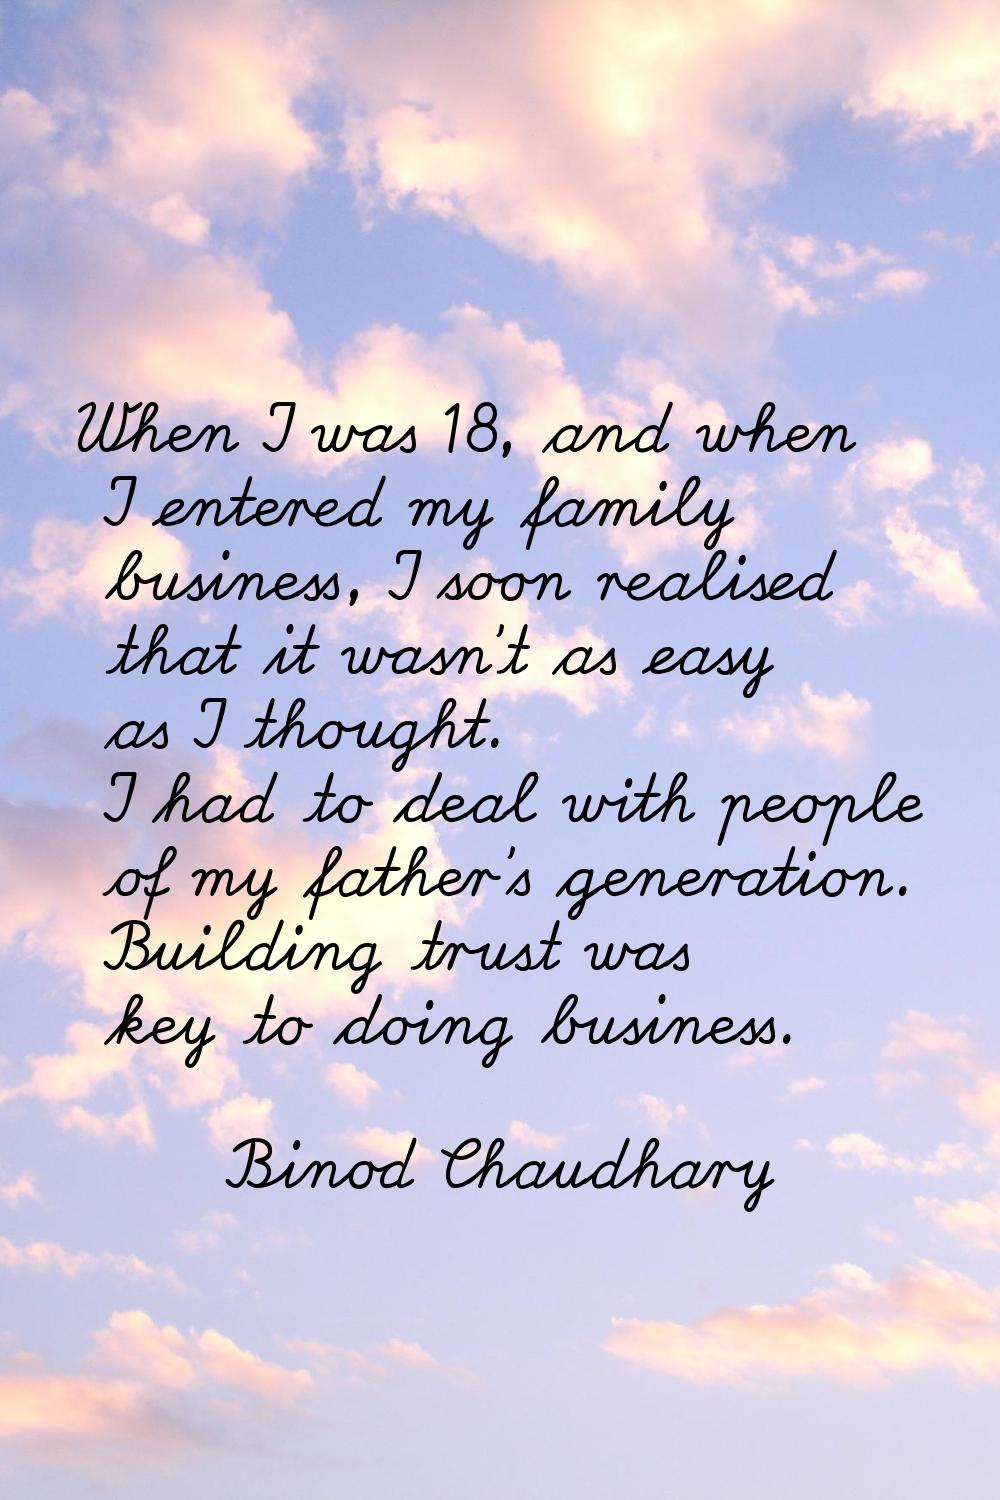 When I was 18, and when I entered my family business, I soon realised that it wasn't as easy as I t